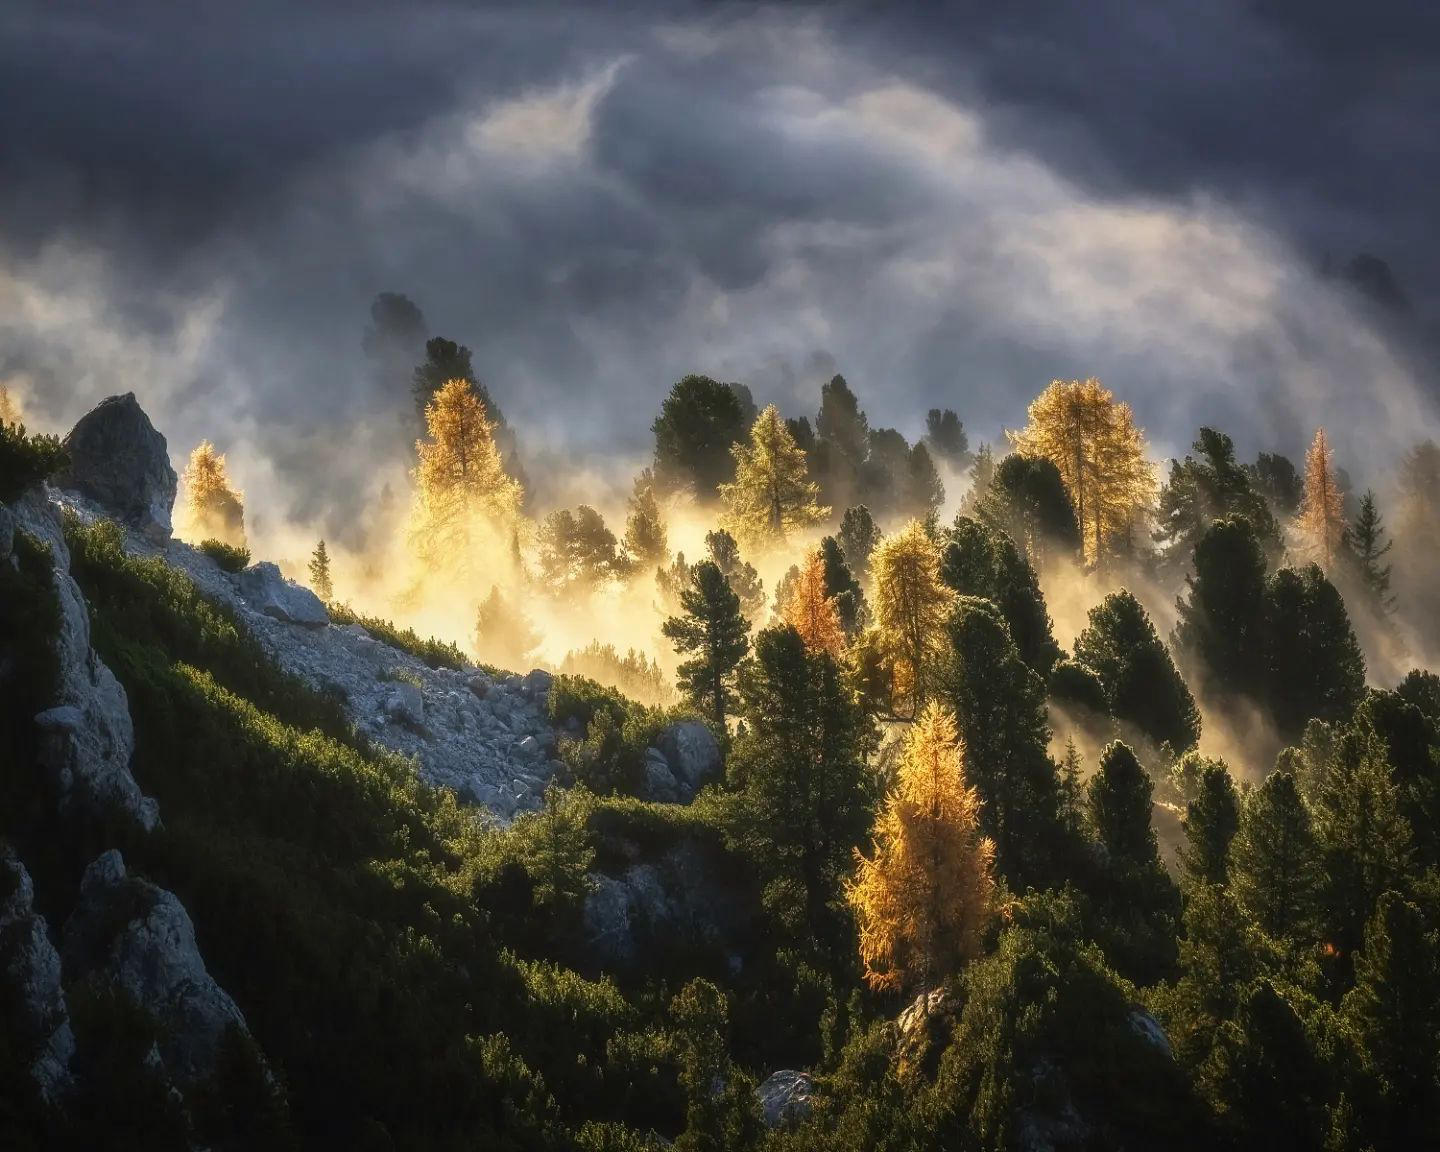 image  1 Kilian Schönberger - Paradise GardenA moment of Fog, Light and Joy in a mountain forest of the Dolom